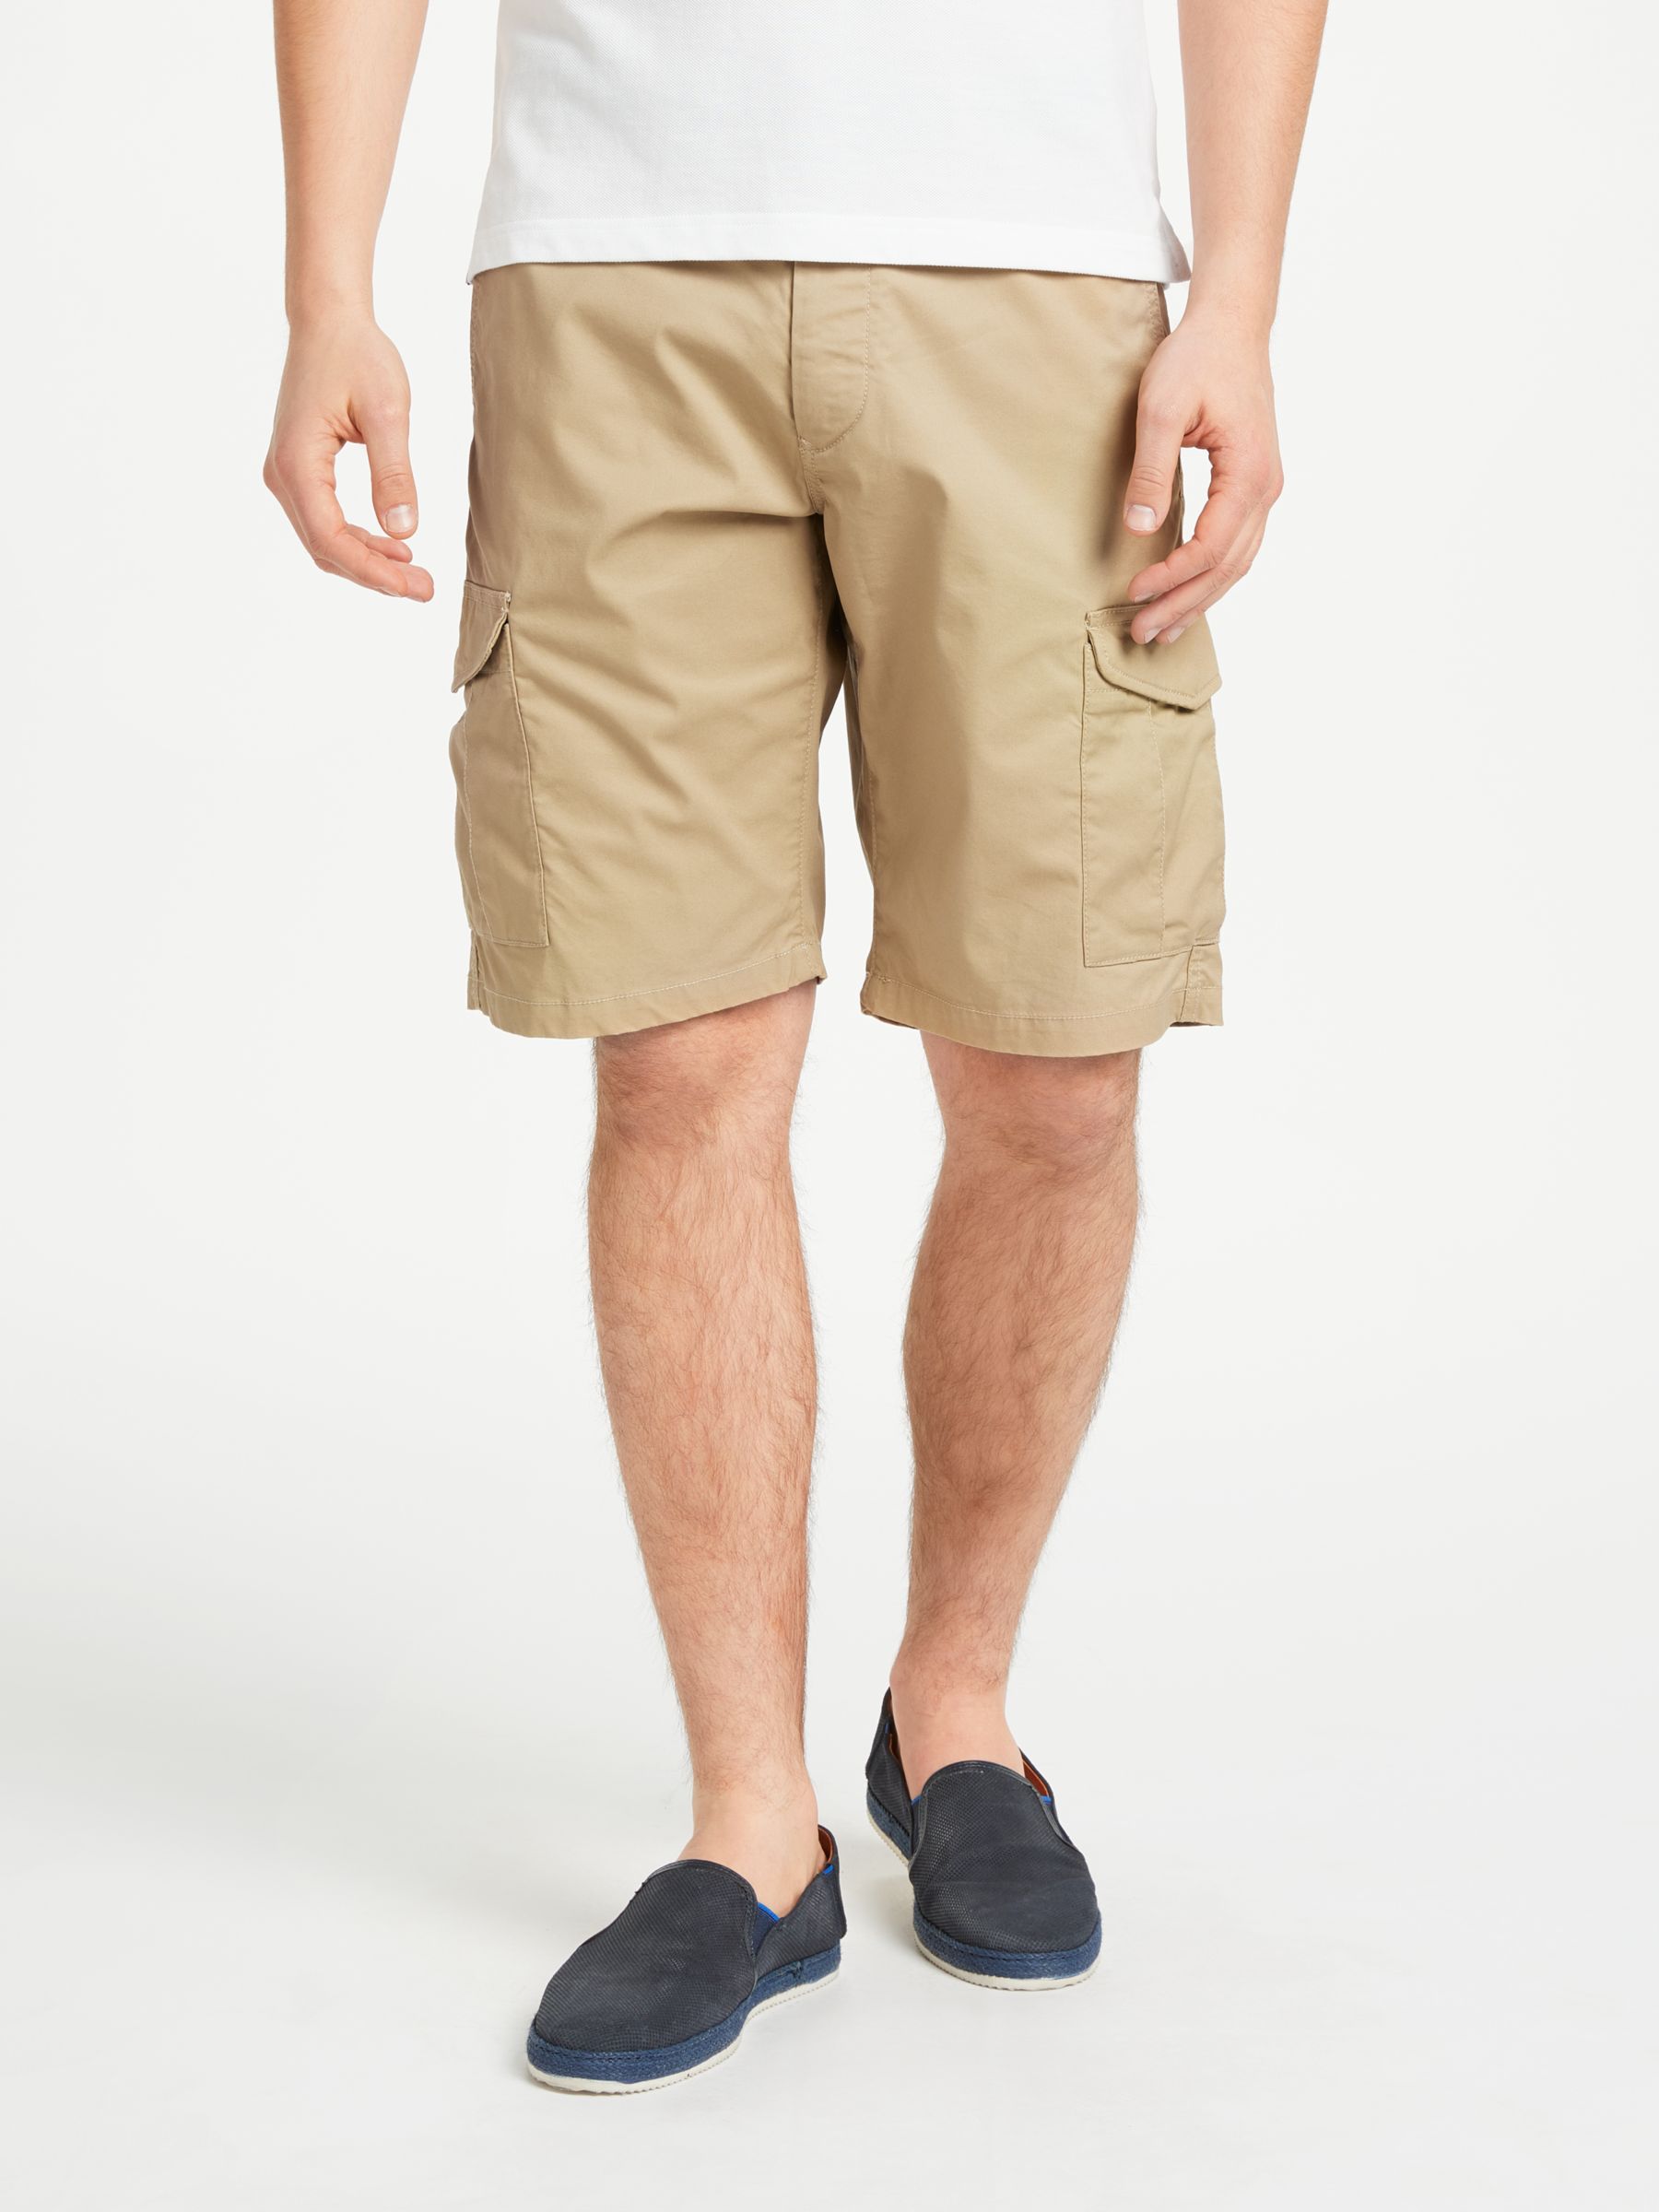 Gant Relaxed Belted Cargo Shorts, Stone, 34R